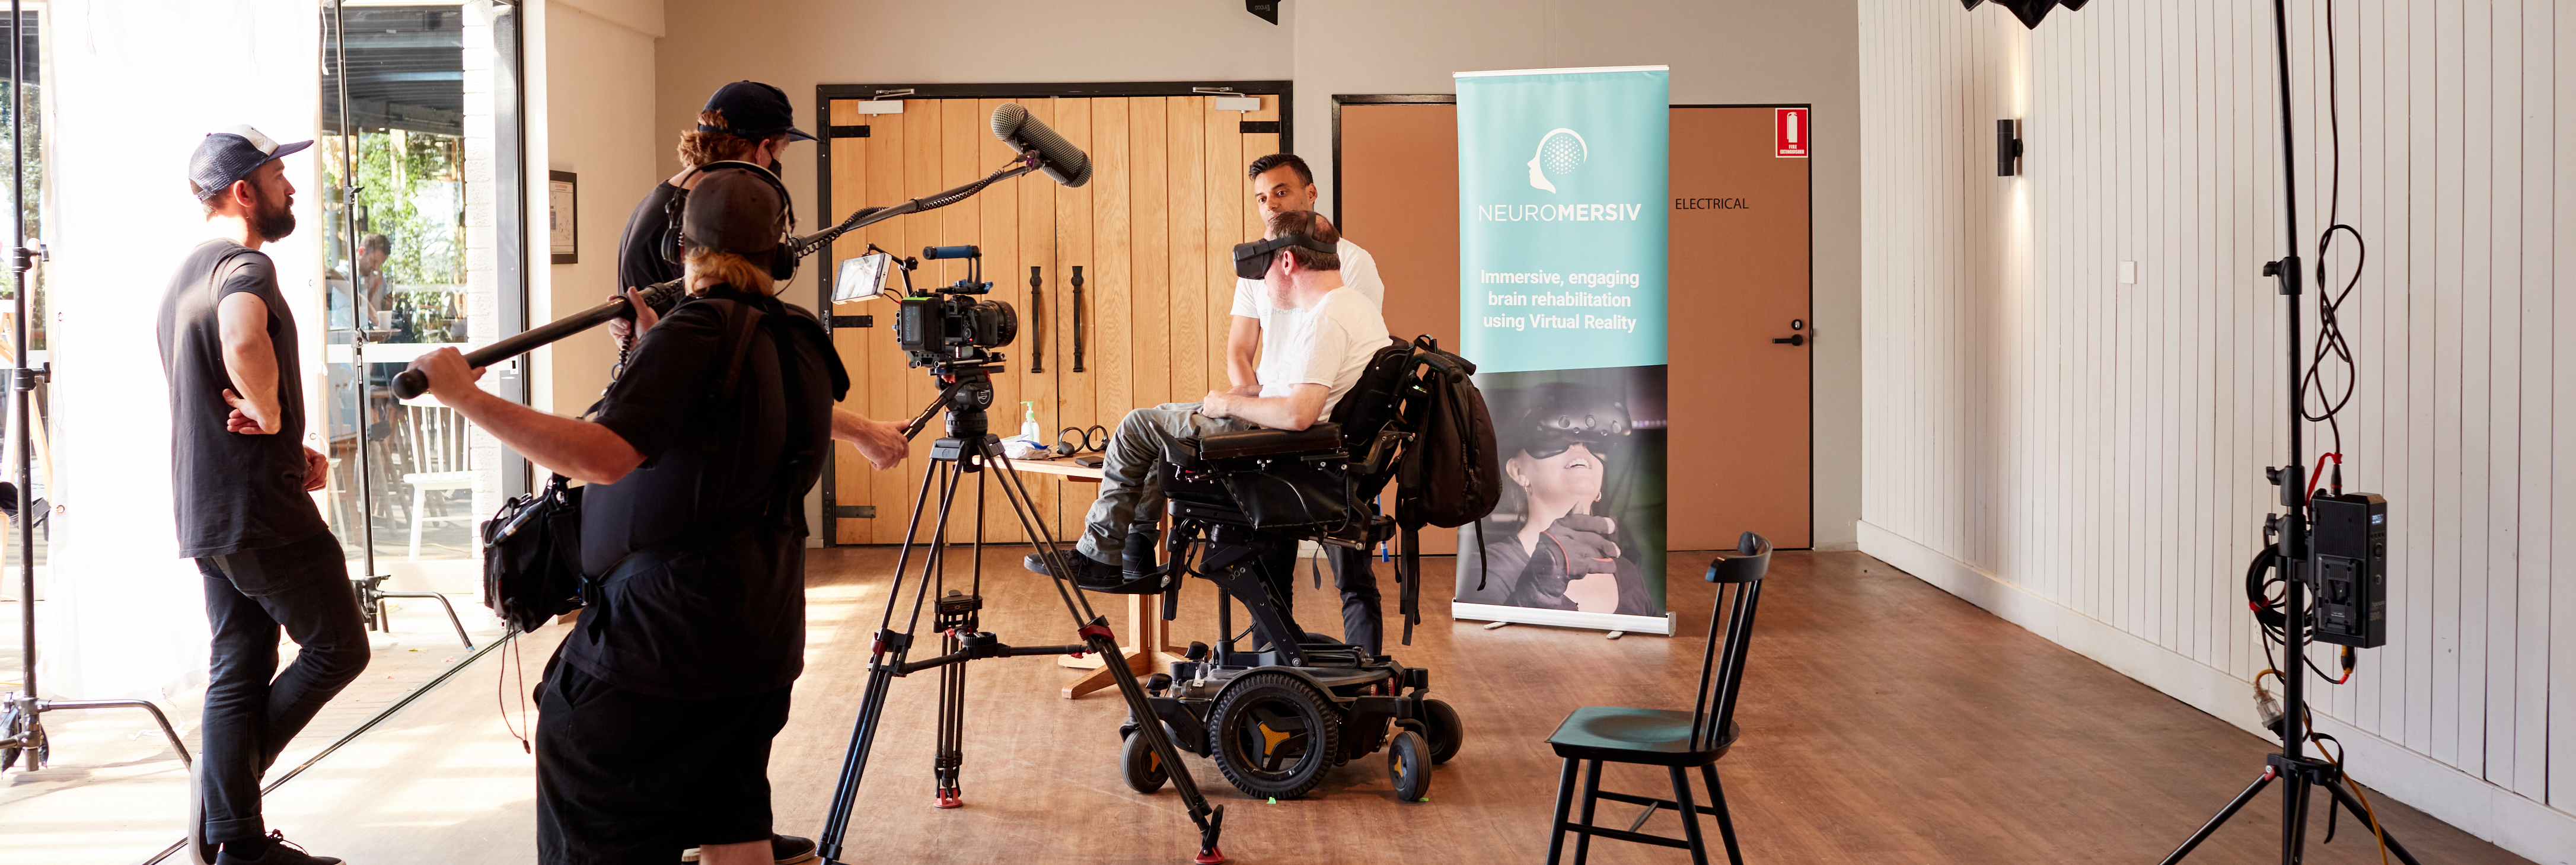 A film crew filming people using assistive technology